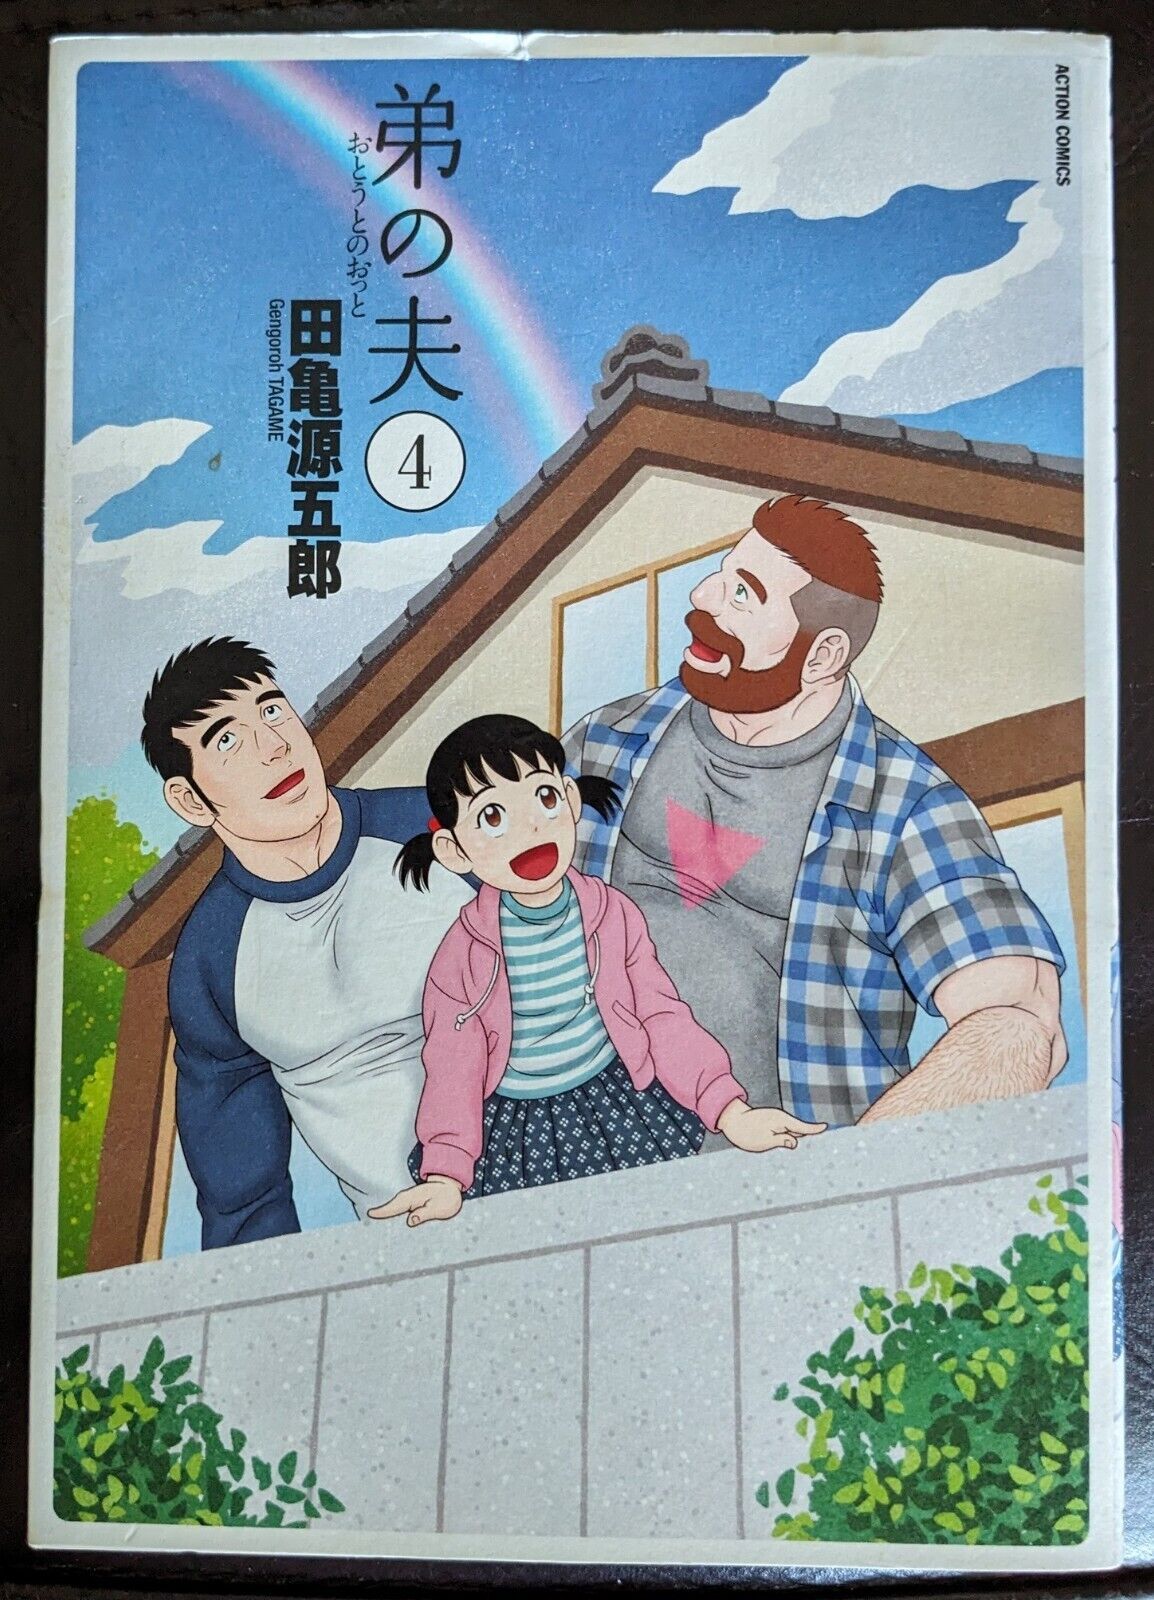 Used My Brother’s Husband 弟の夫 vol.4 Japanese Edition comic book Tagame Gengoroh